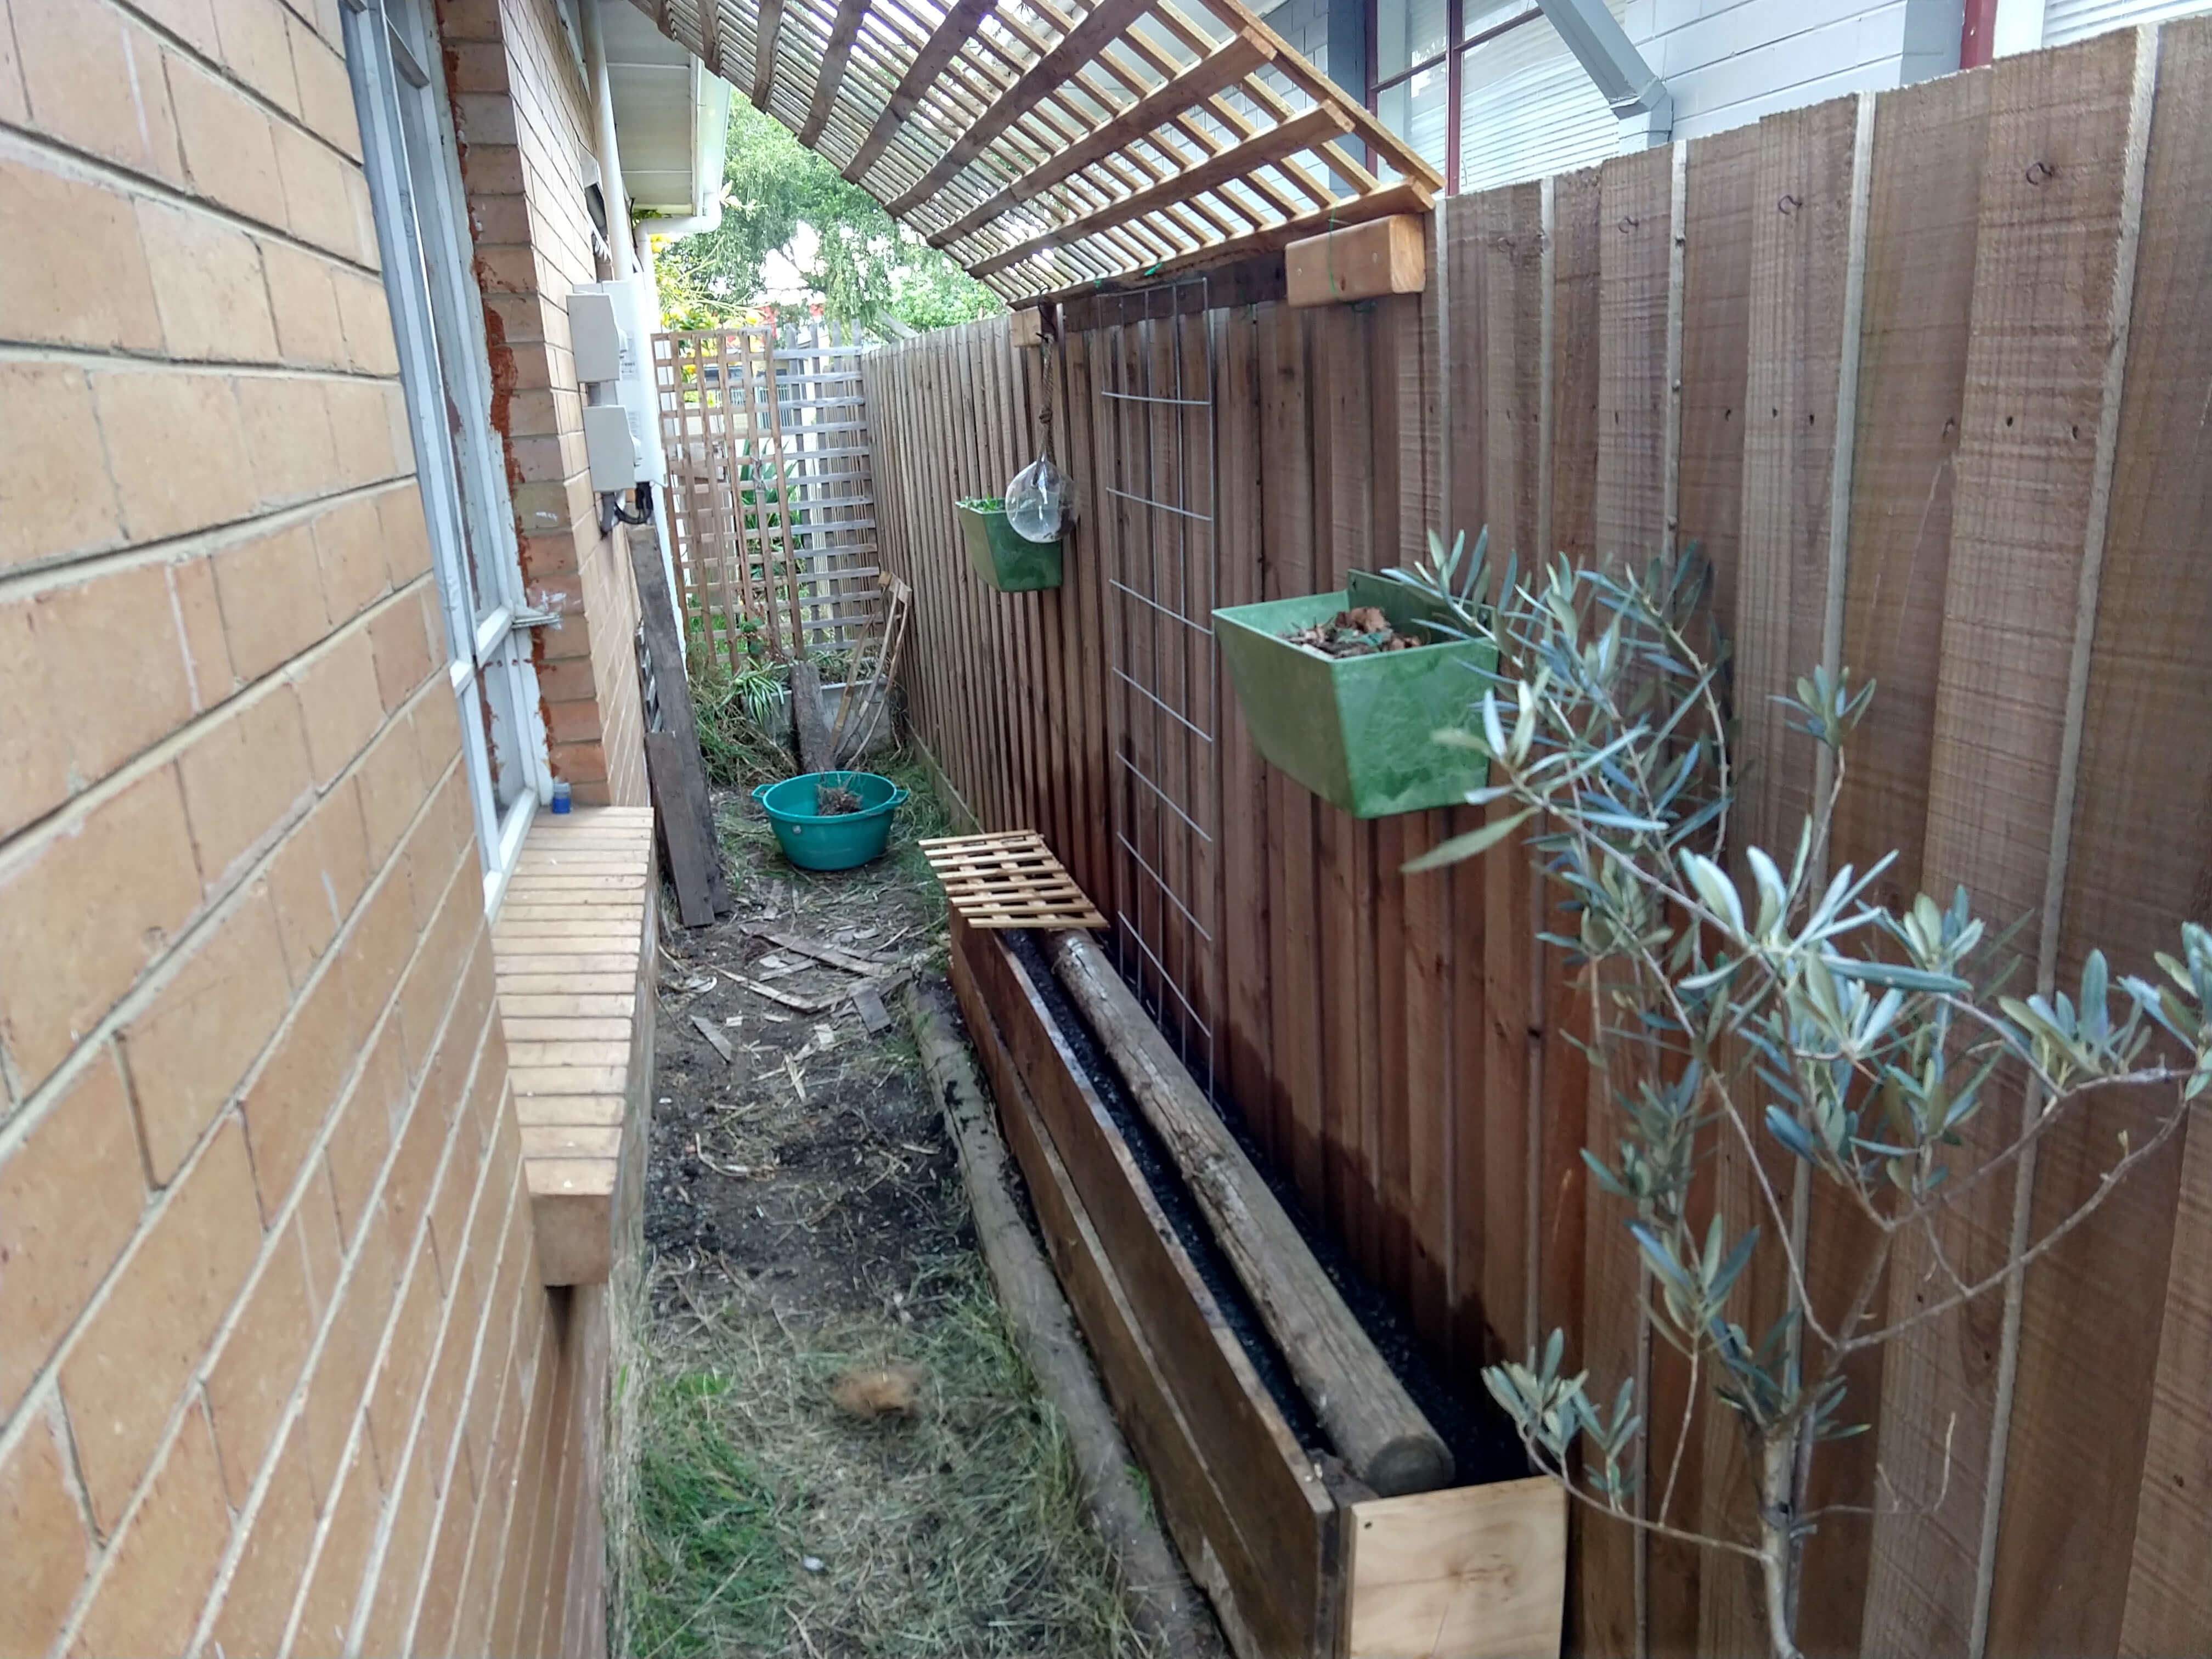 A garden bed built up against a wooden fence down the side of a house